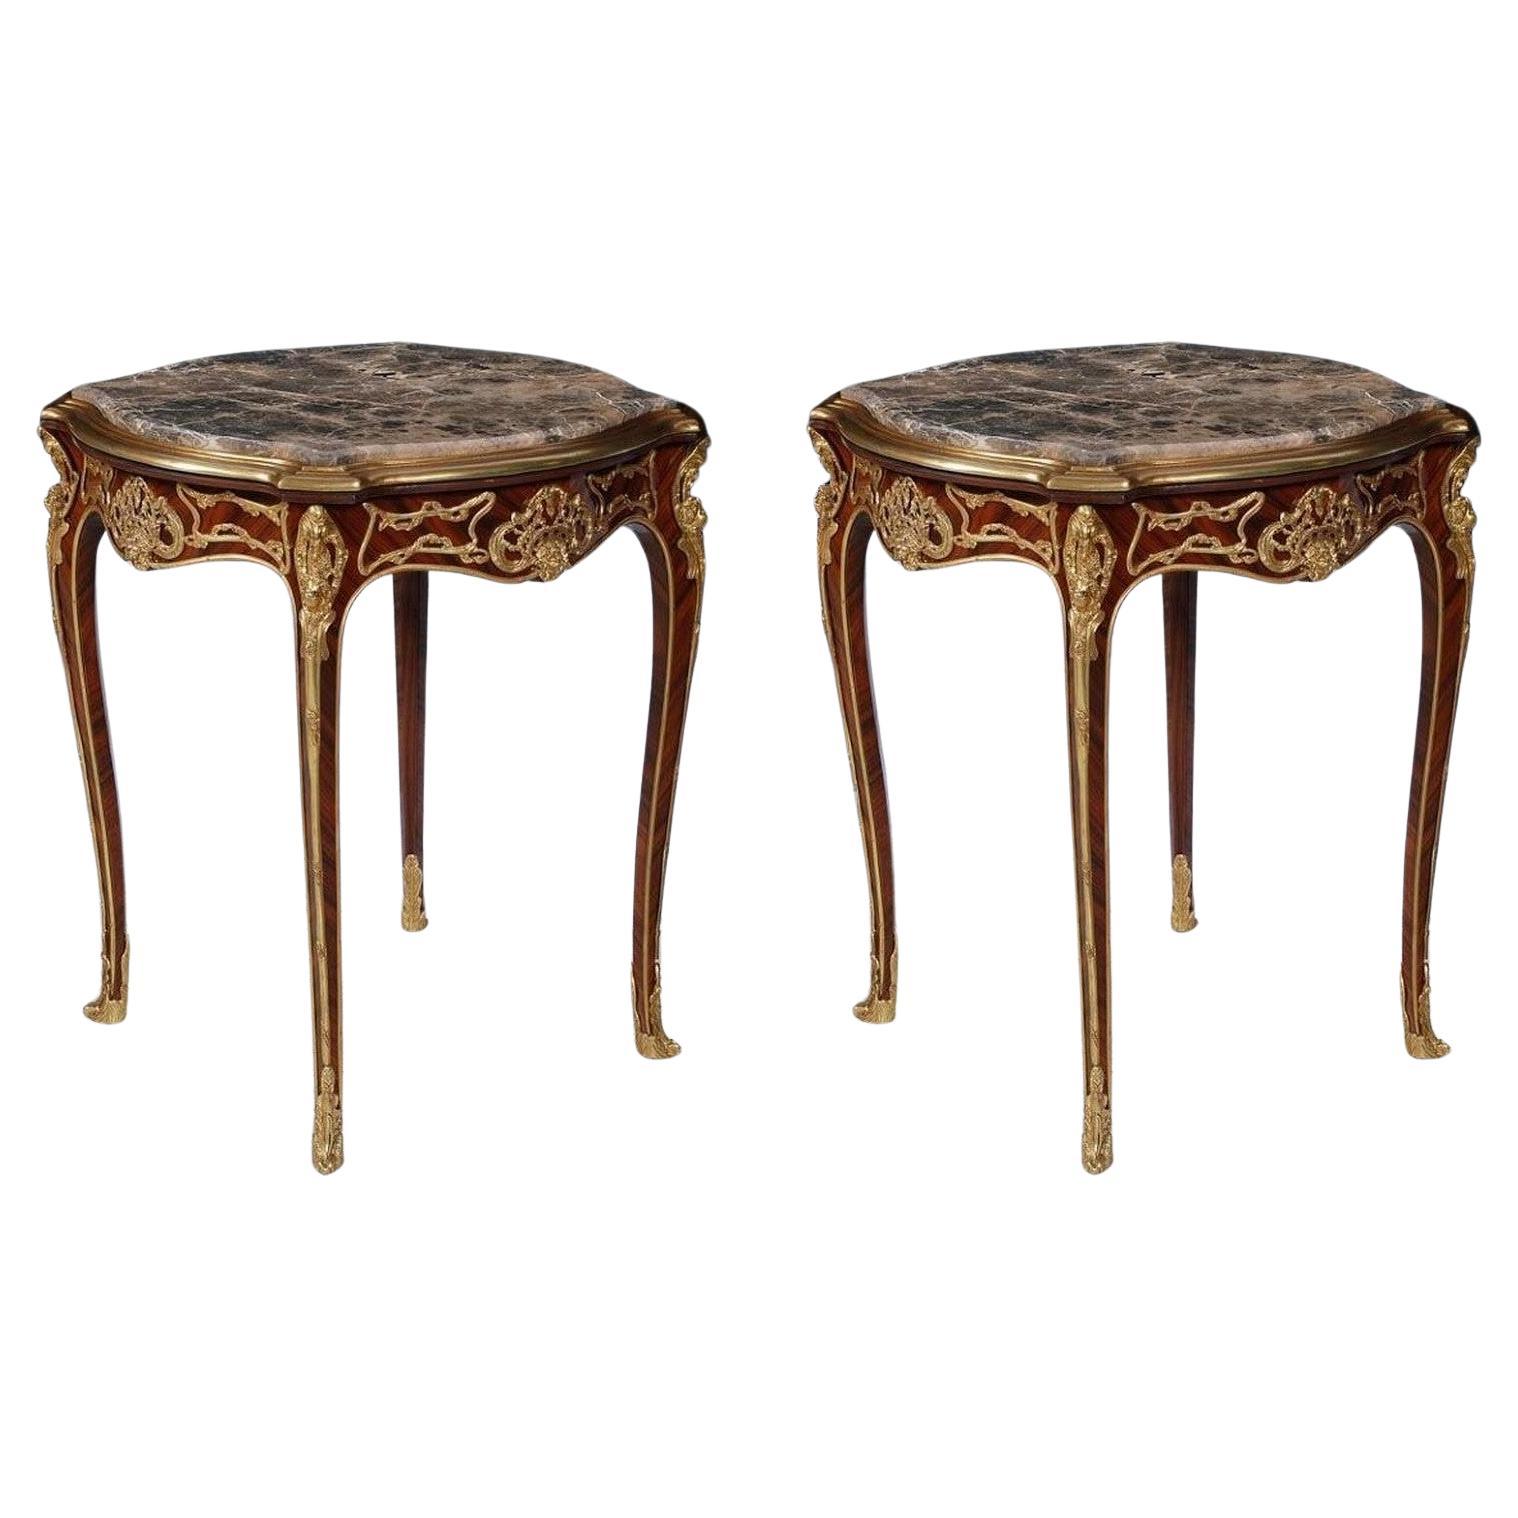  Important French Louis XVI Style Gilt Bronze Mahogany Marble Top End Tables For Sale